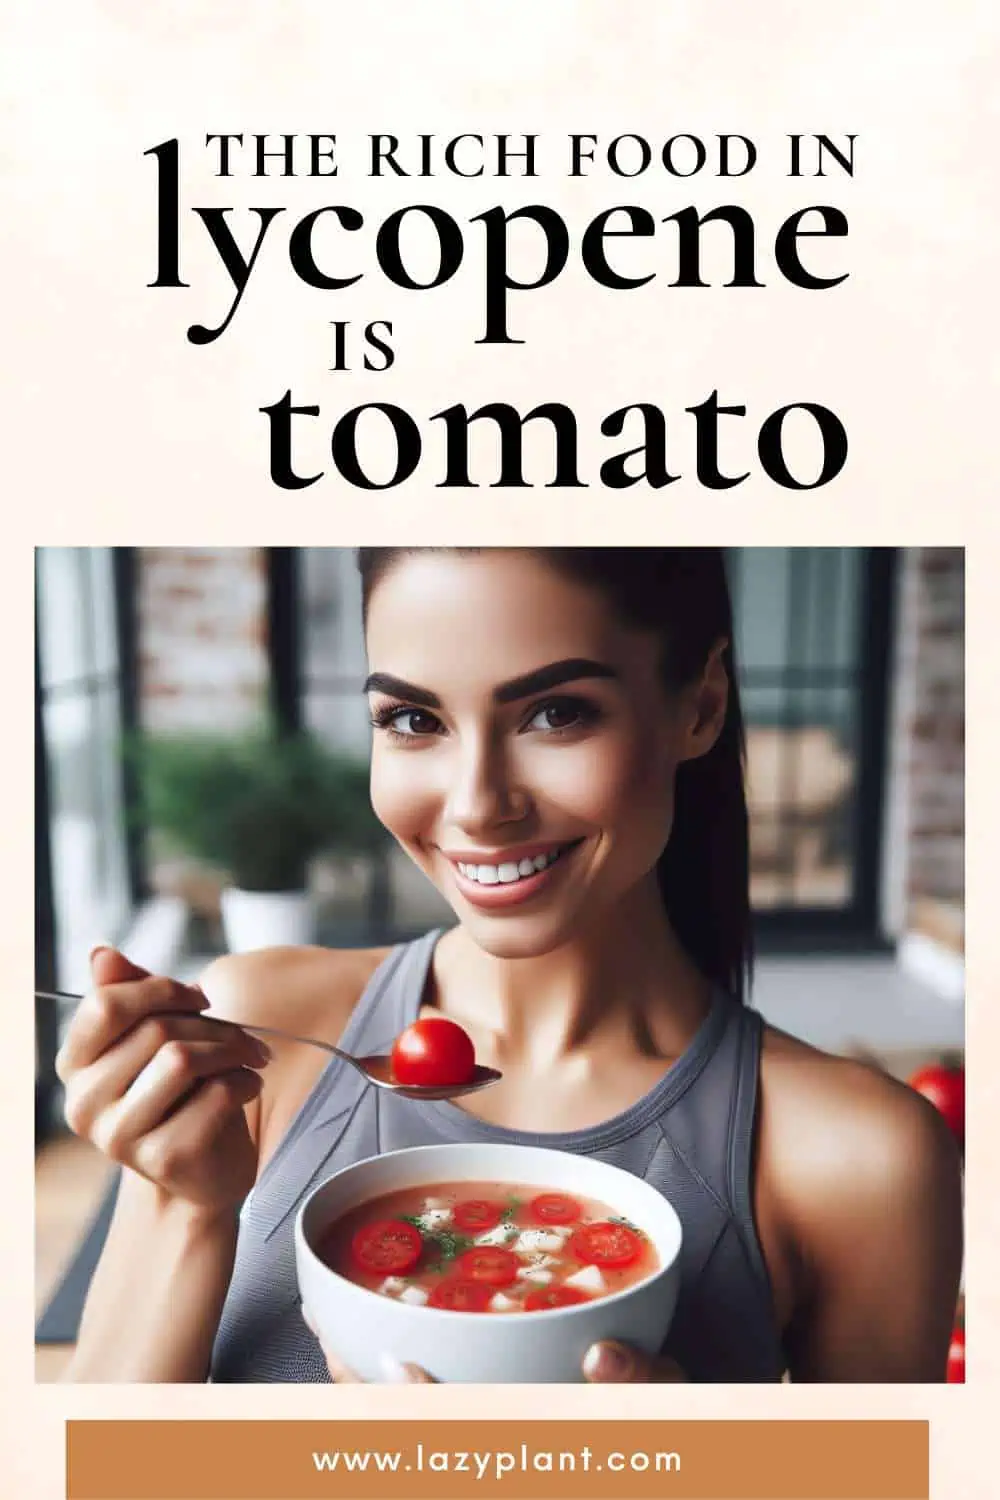 Tomato products are the richest foods in lycopene!